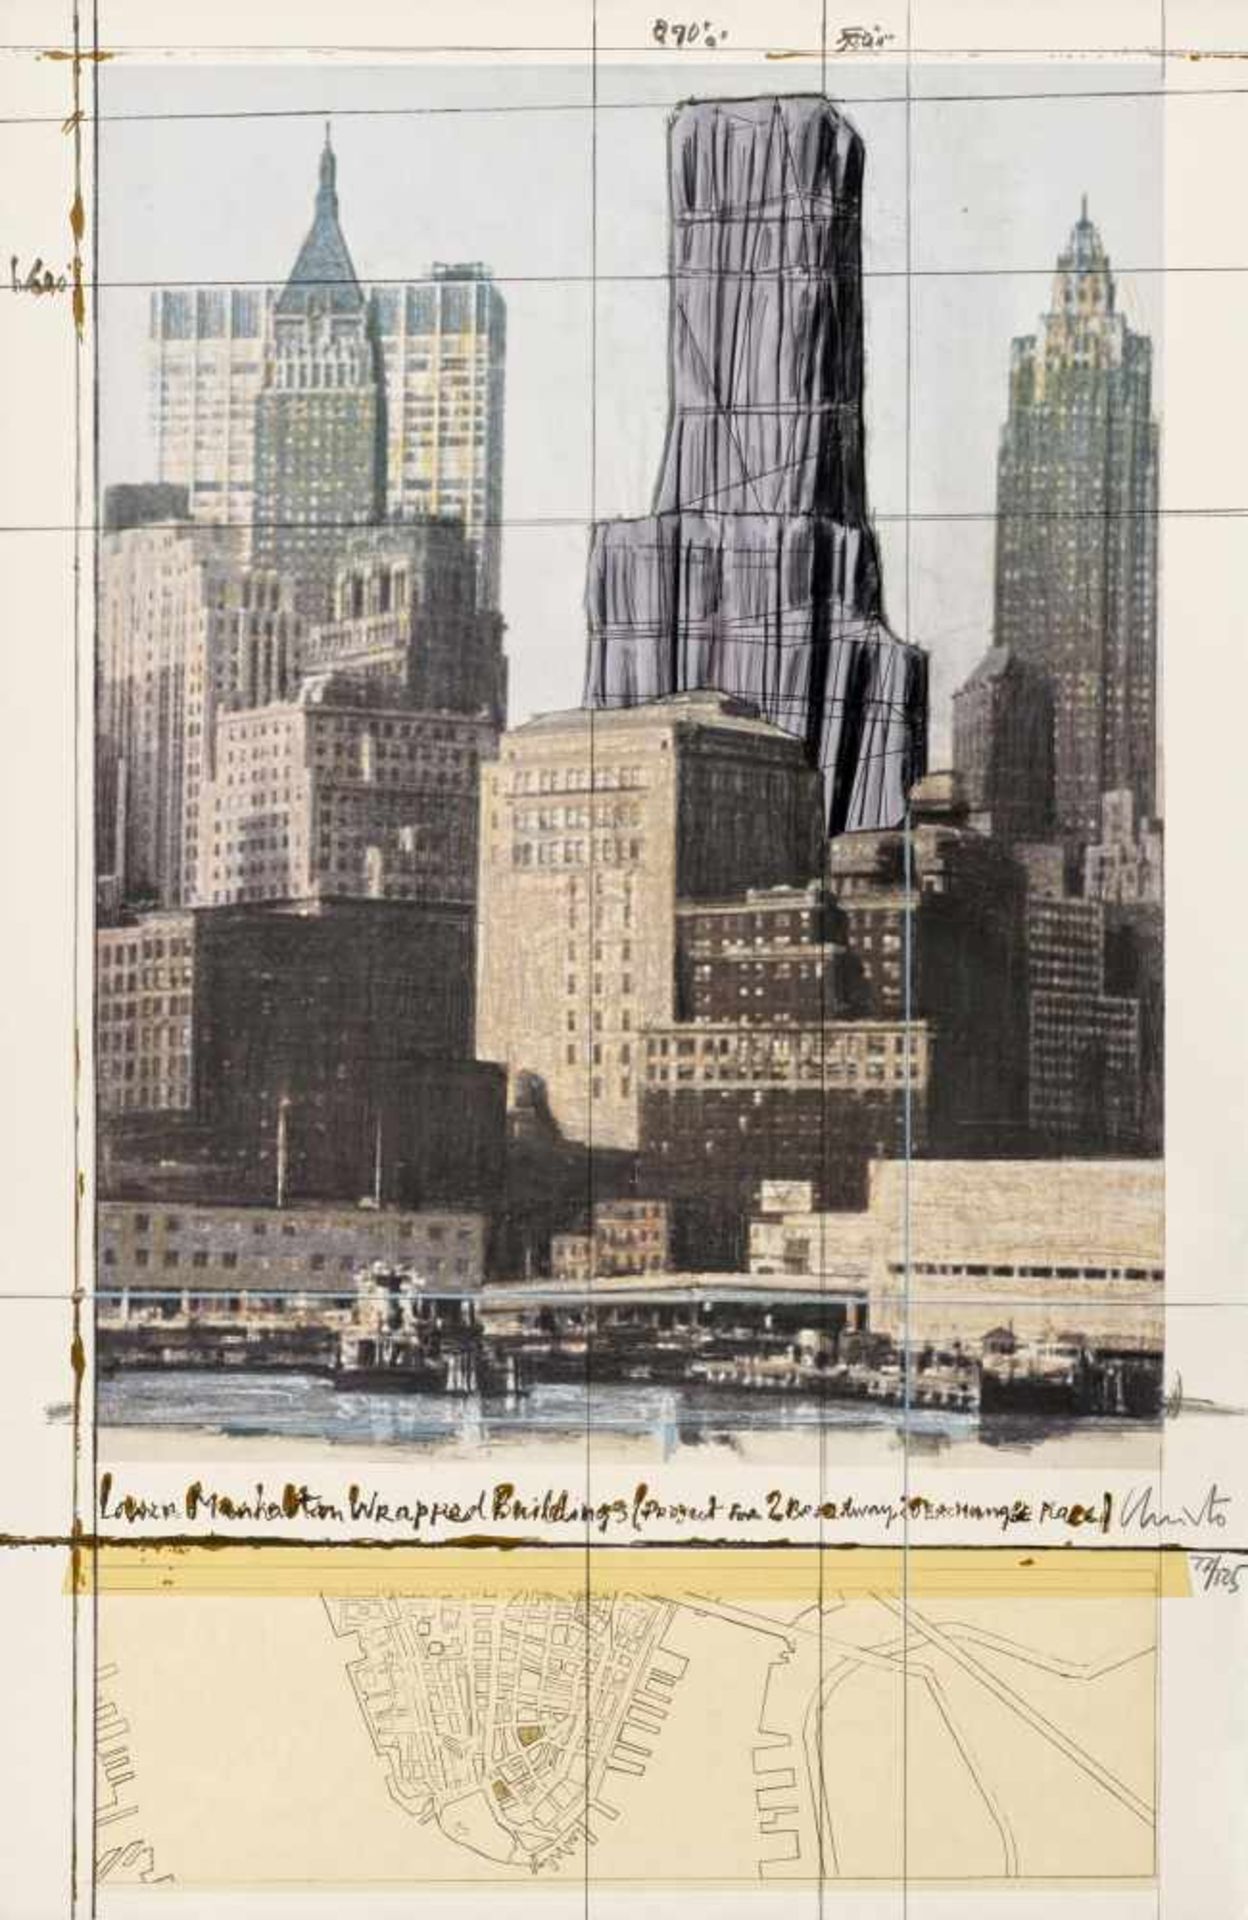 Christo (Christo Javatscheff)1935 GabrovoLower Manhattan Wrapped Building, Project for 2 Broadway,